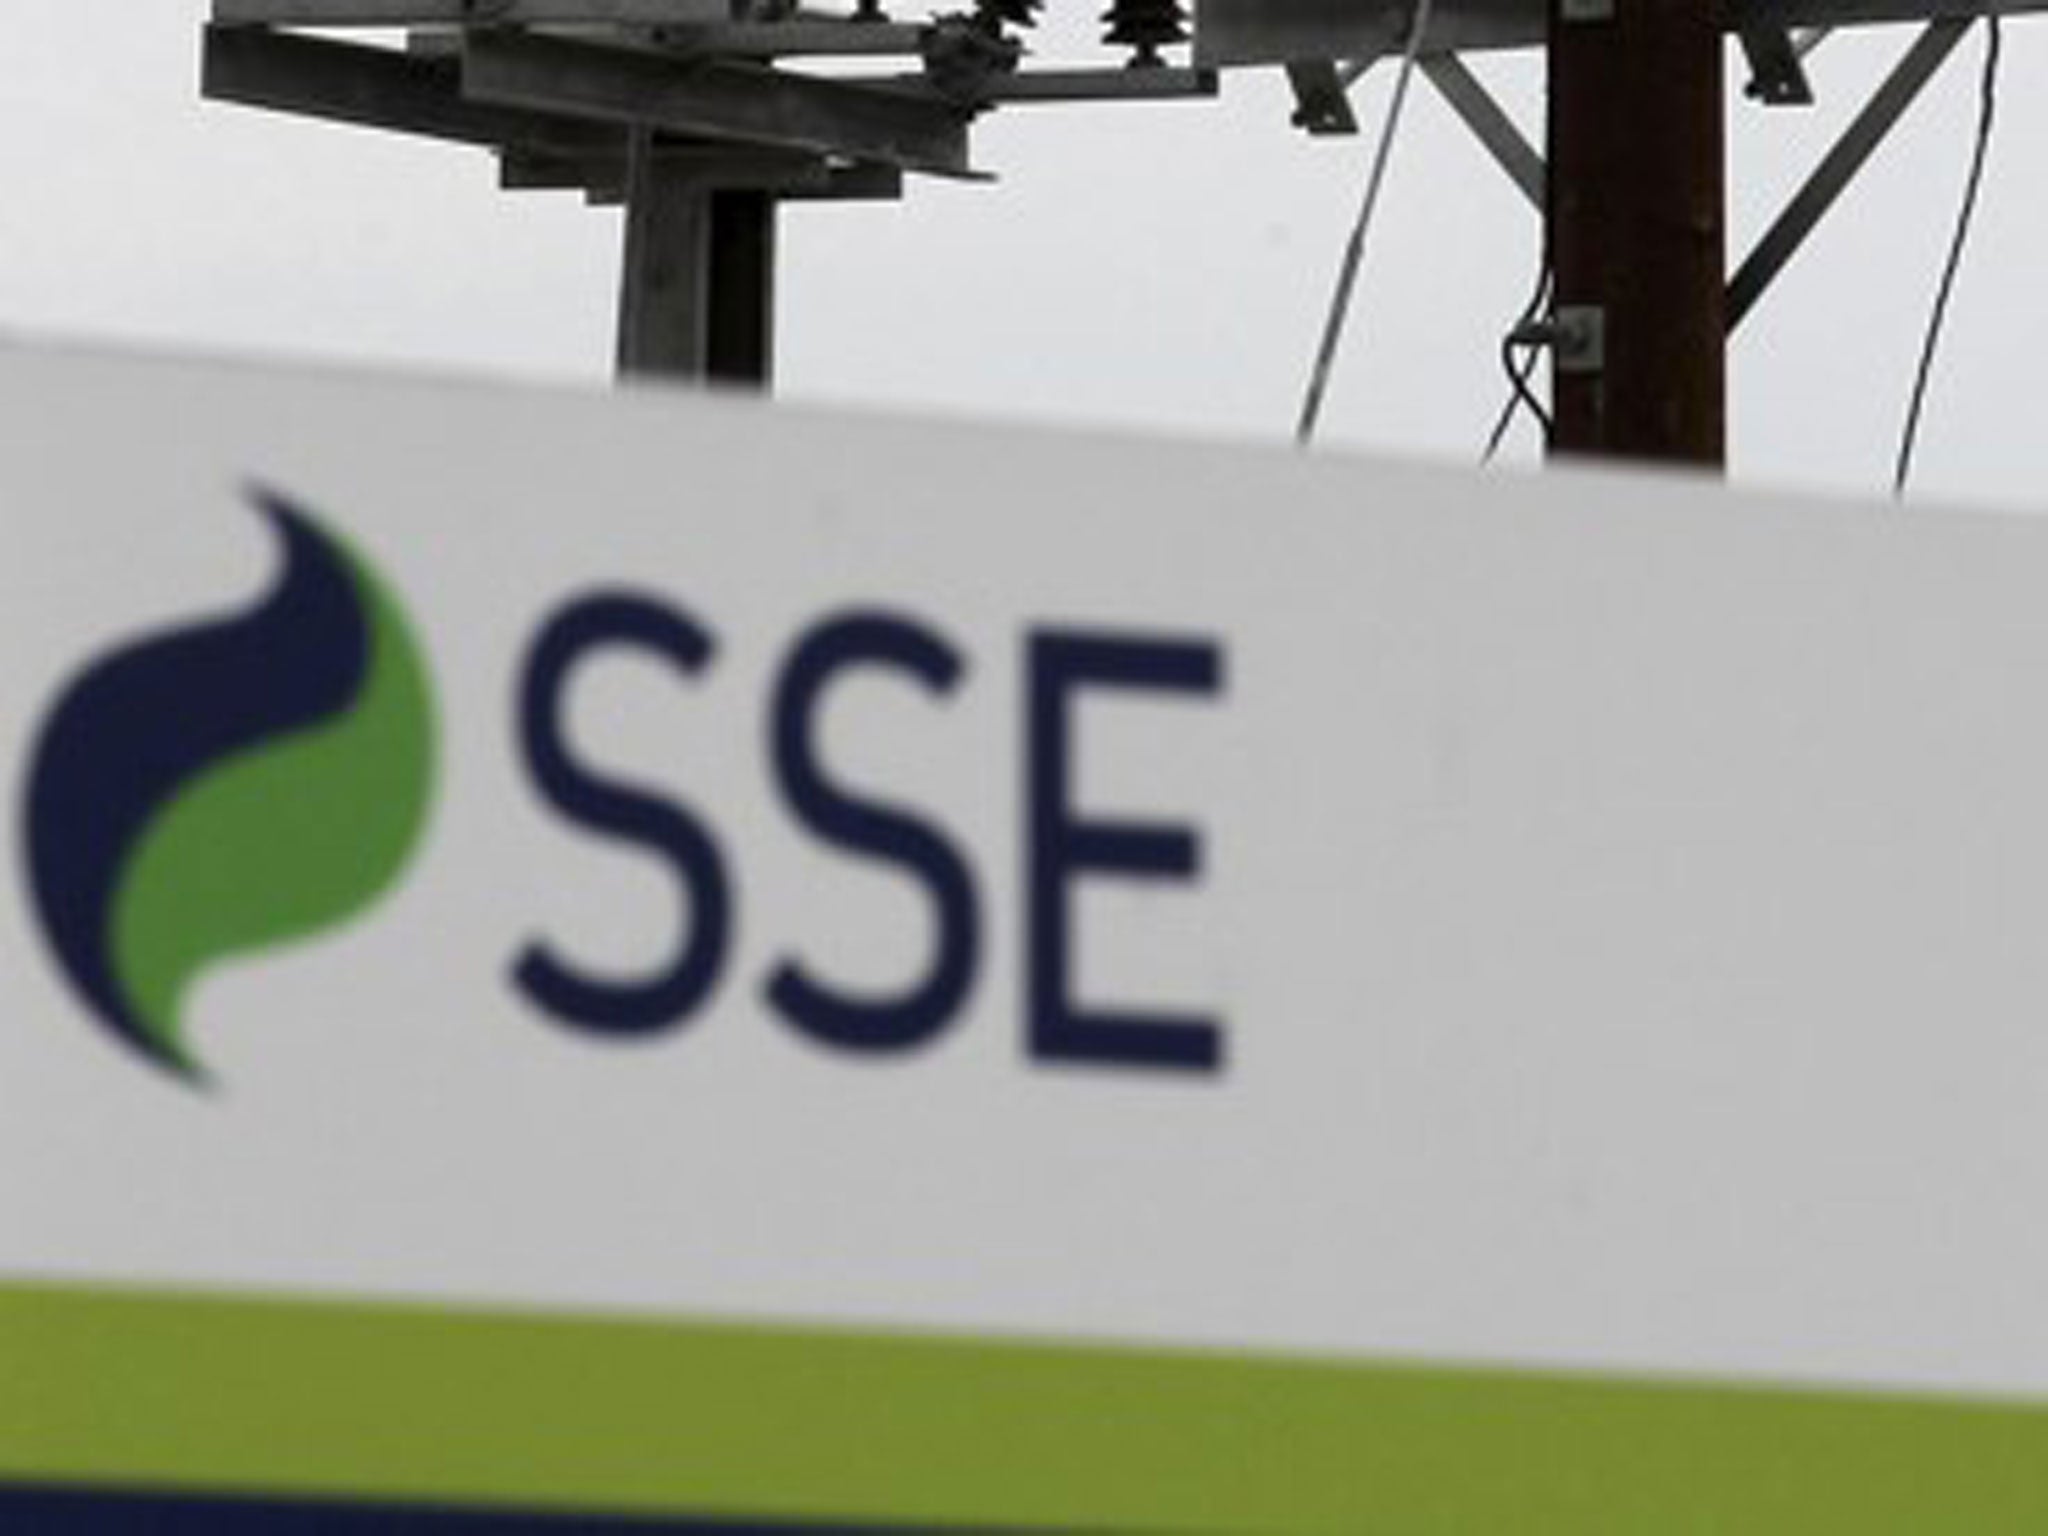 Utility giant SSE has now been penalised by more than £12m in two years by the regulator Ofgem